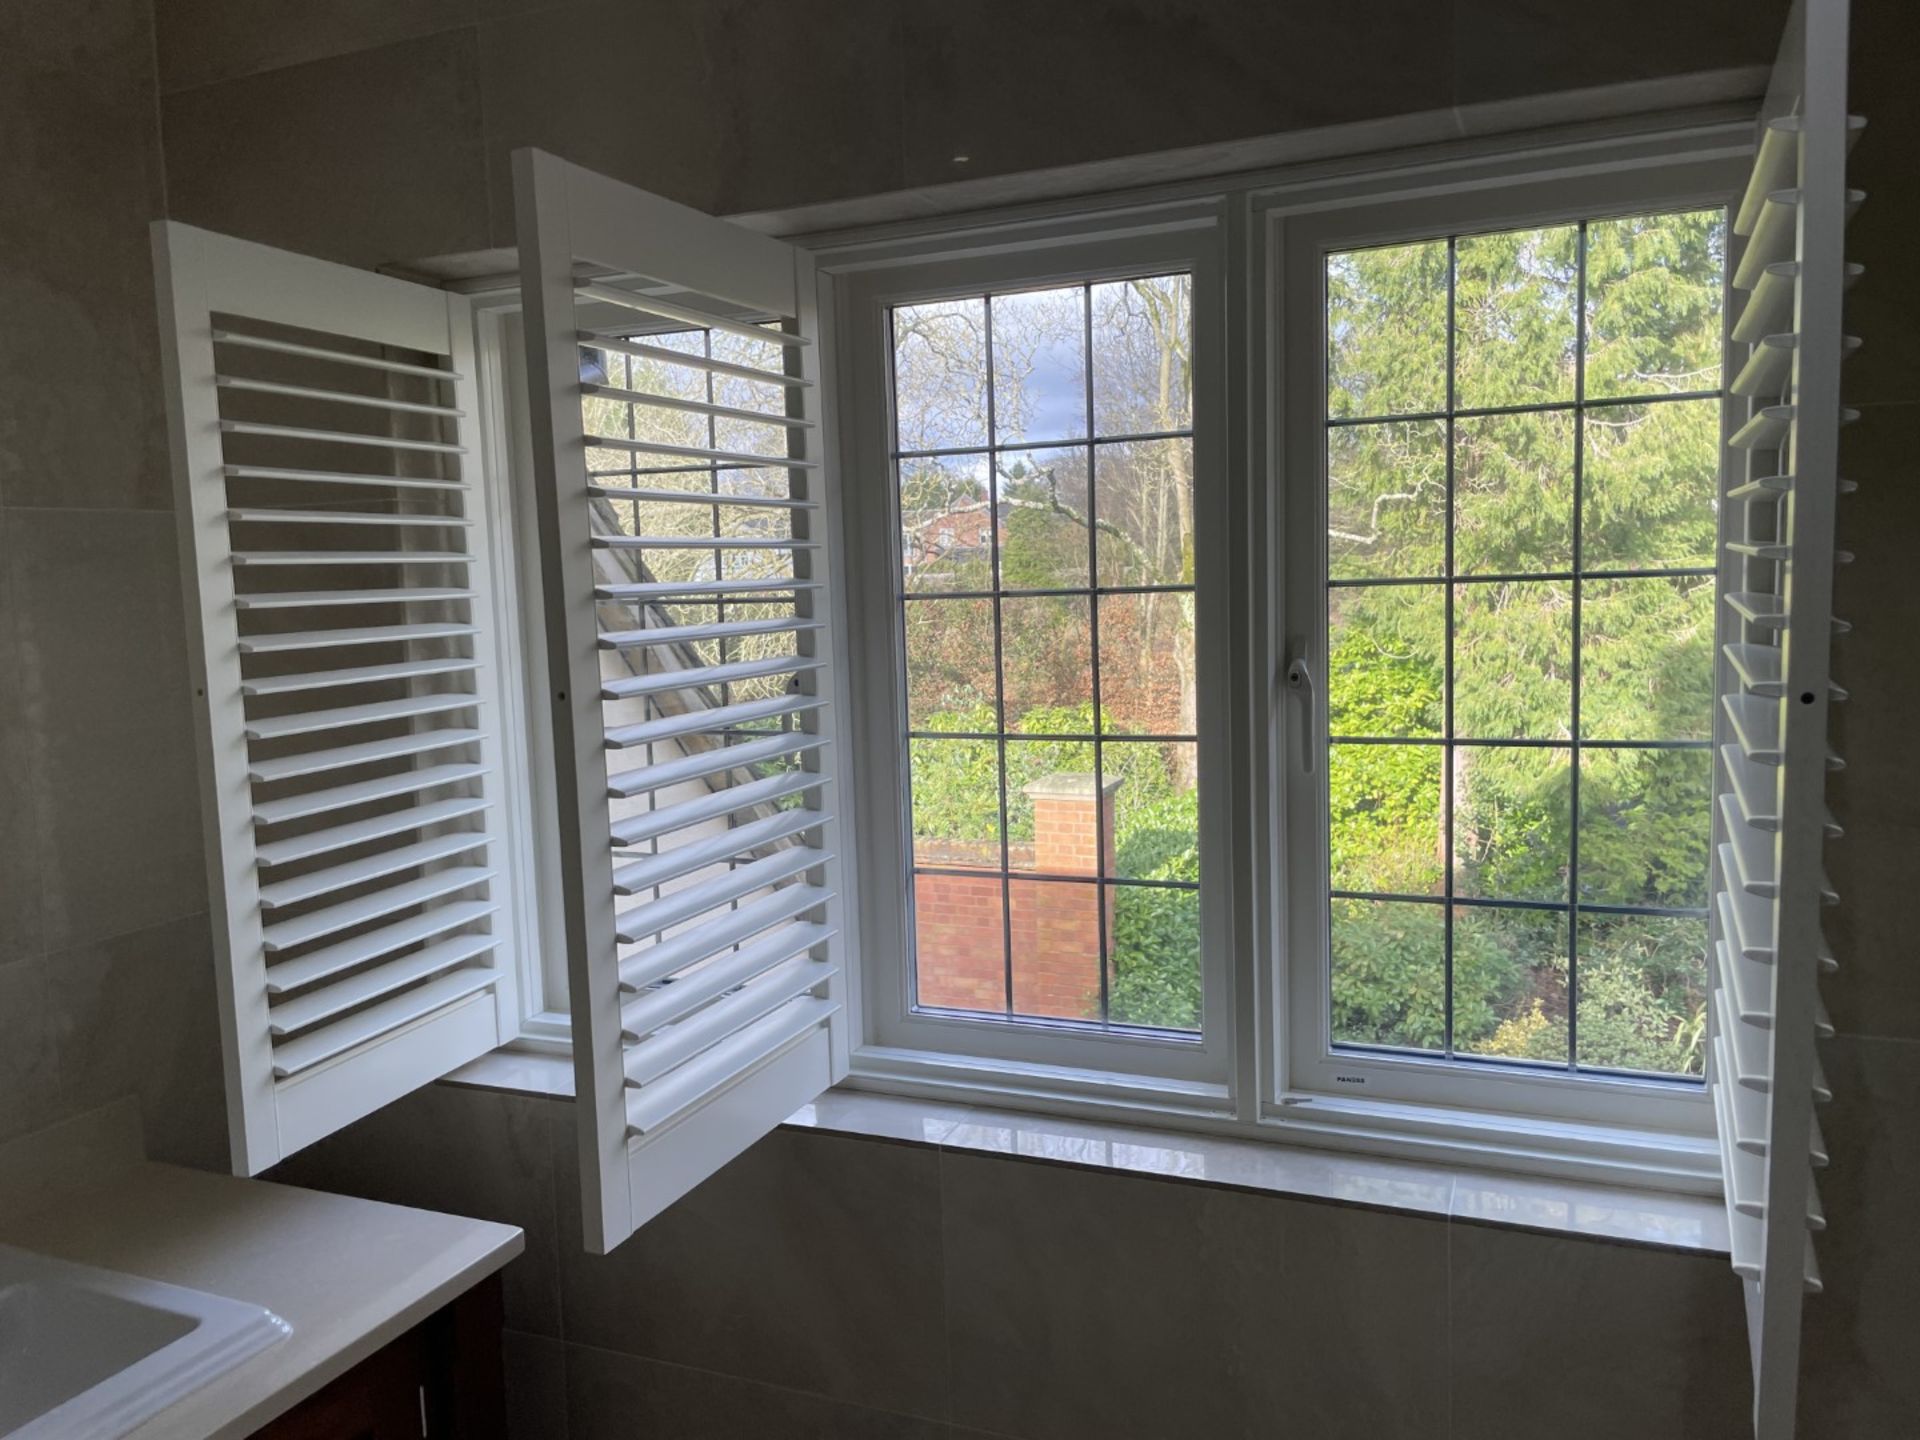 1 x Hardwood Timber Double Glazed Leaded 3-Pane Window Frame fitted with Shutter Blinds - Image 5 of 15